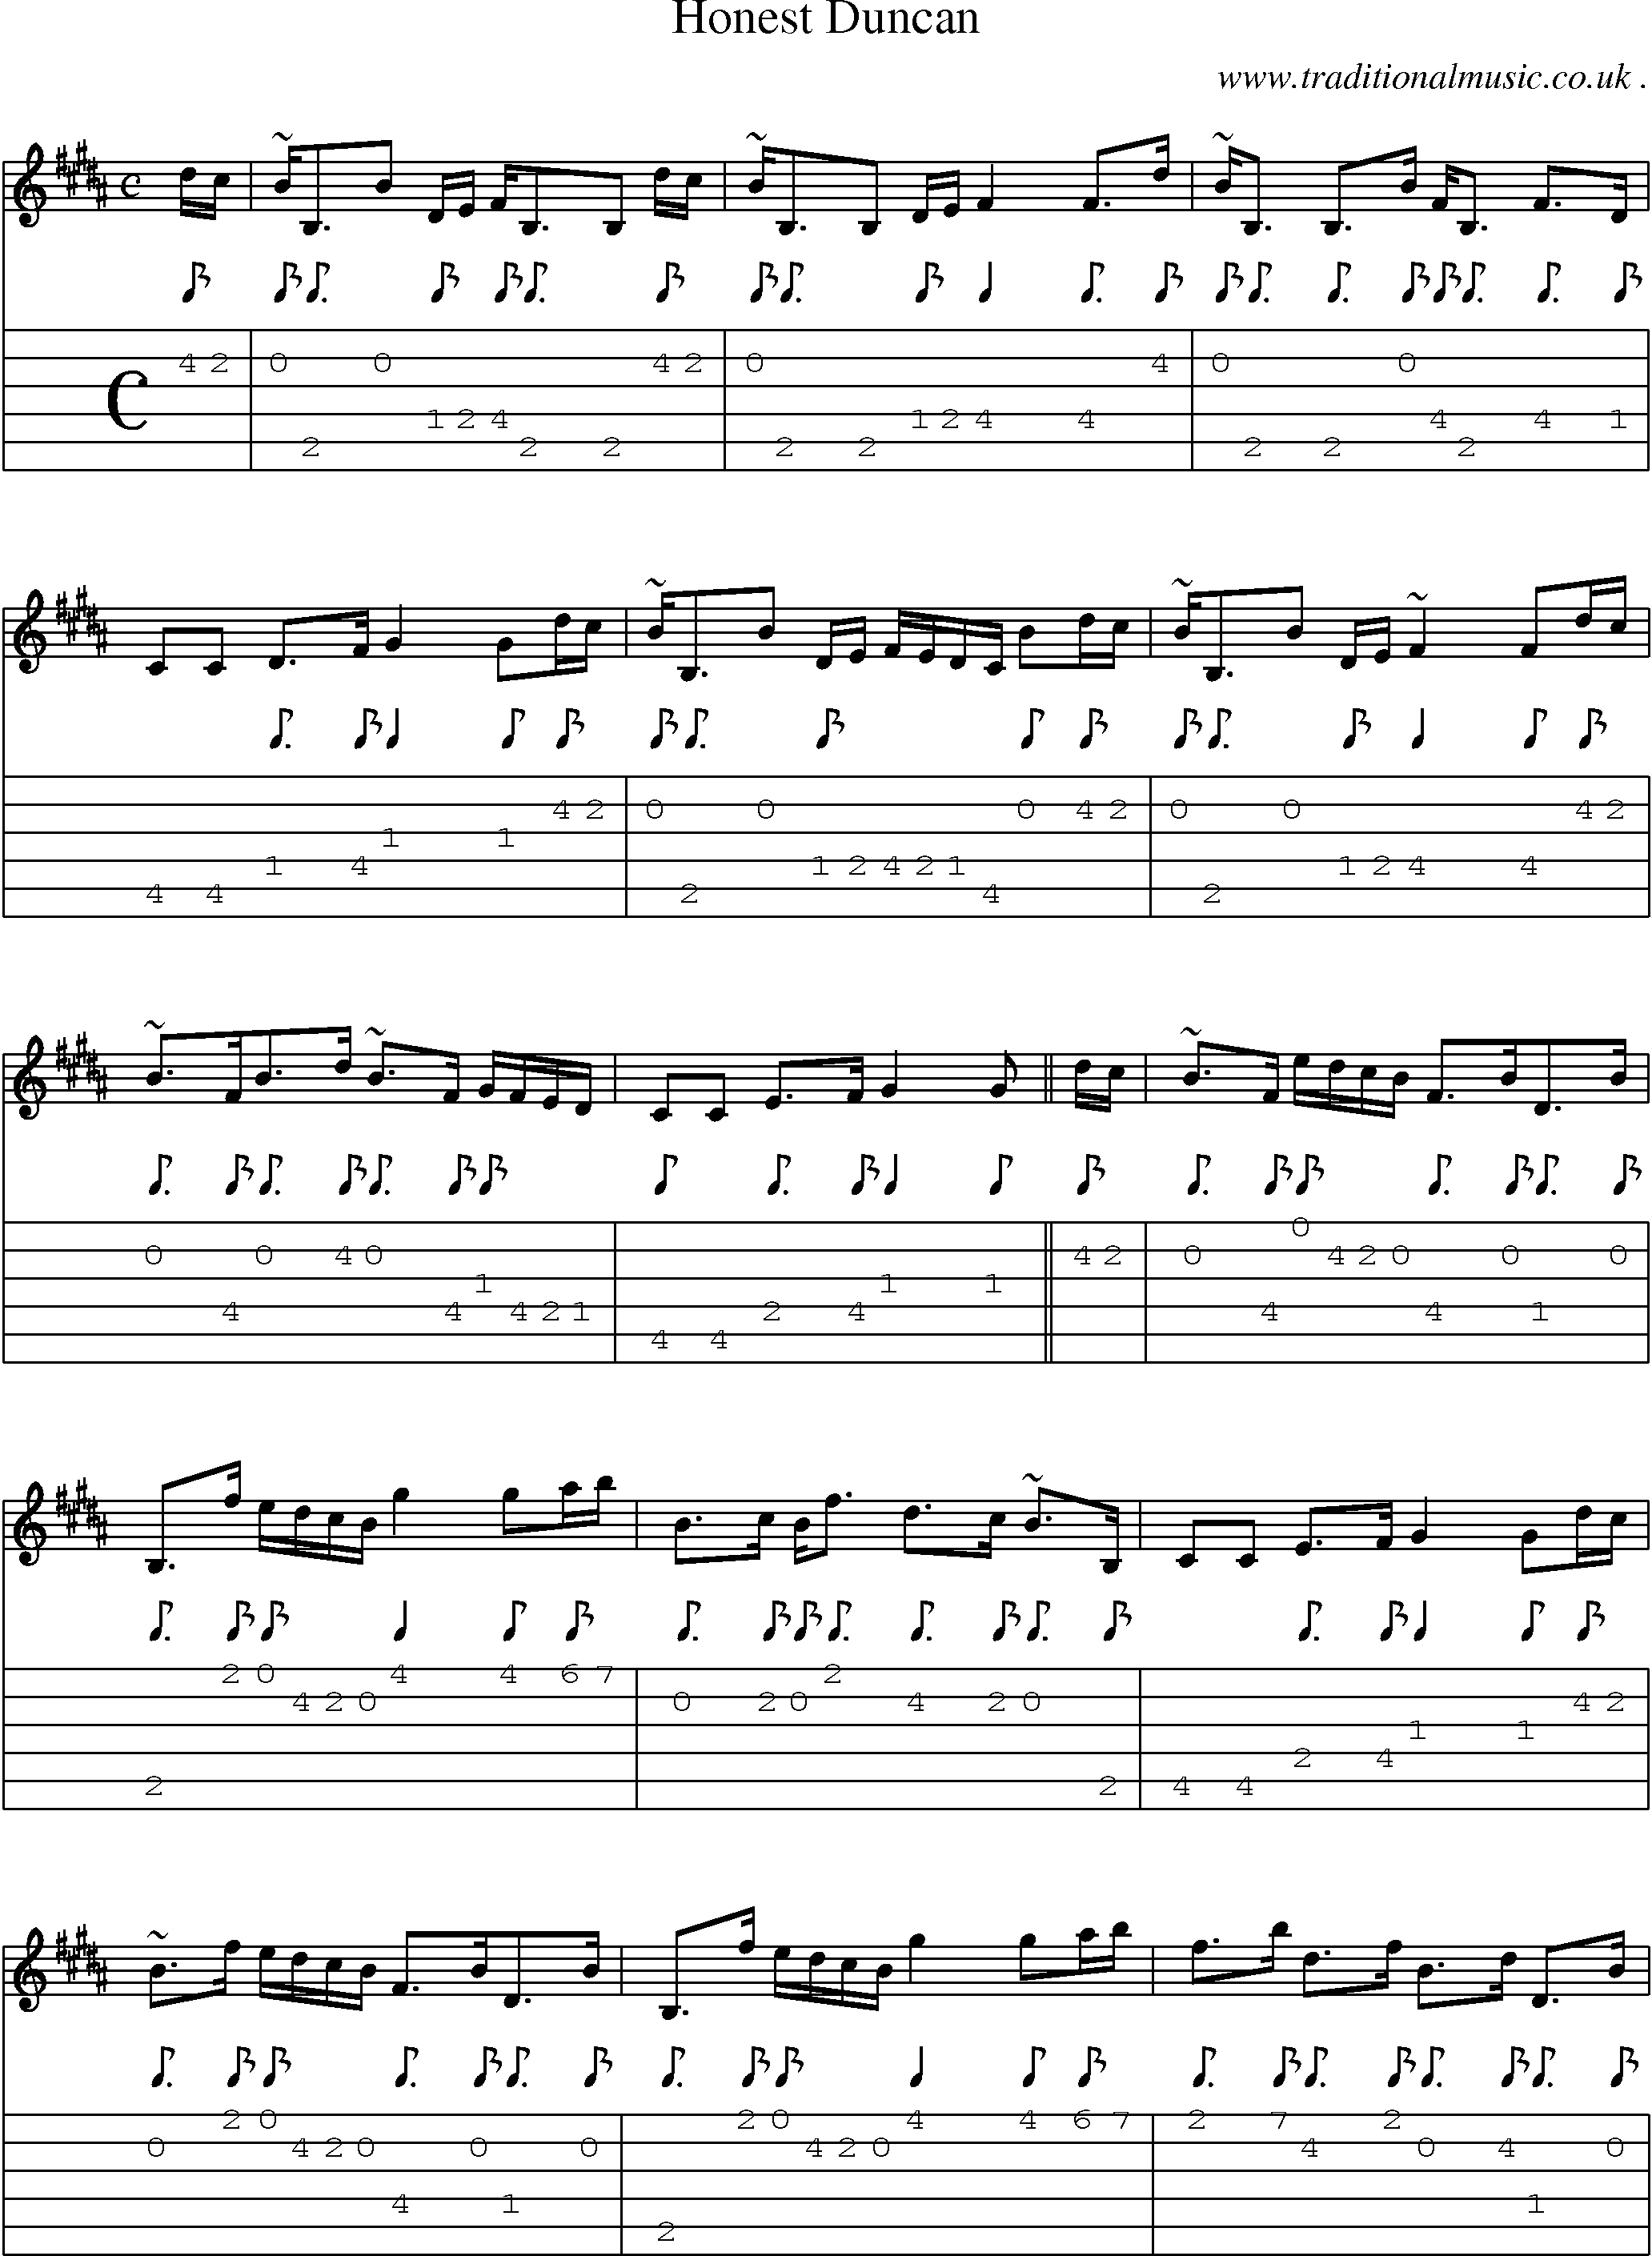 Sheet-music  score, Chords and Guitar Tabs for Honest Duncan